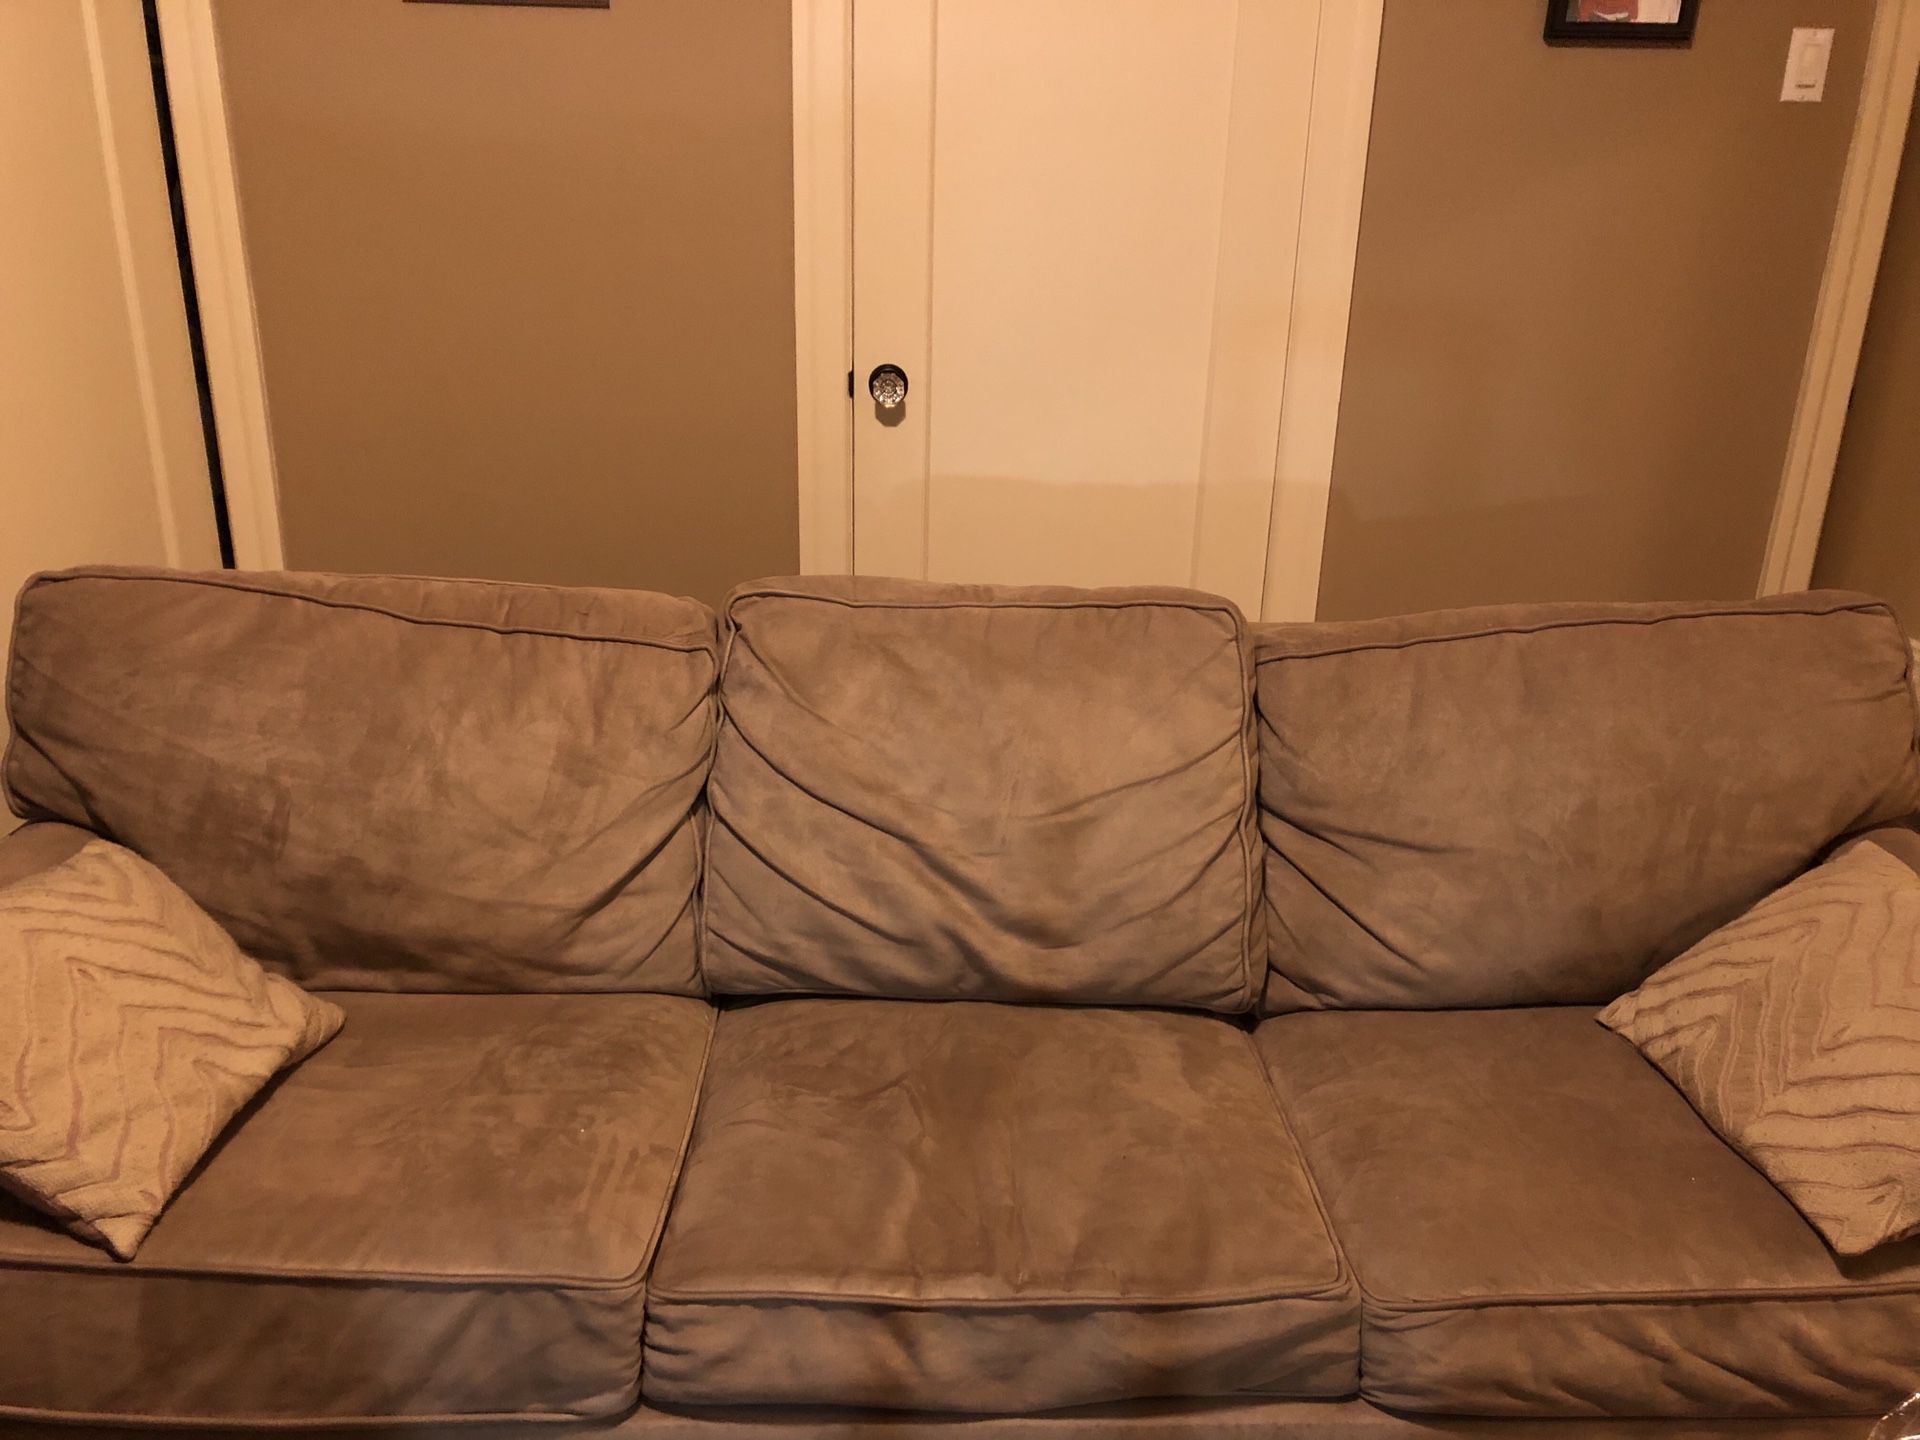 FREE Pottery Barn sleeper couch